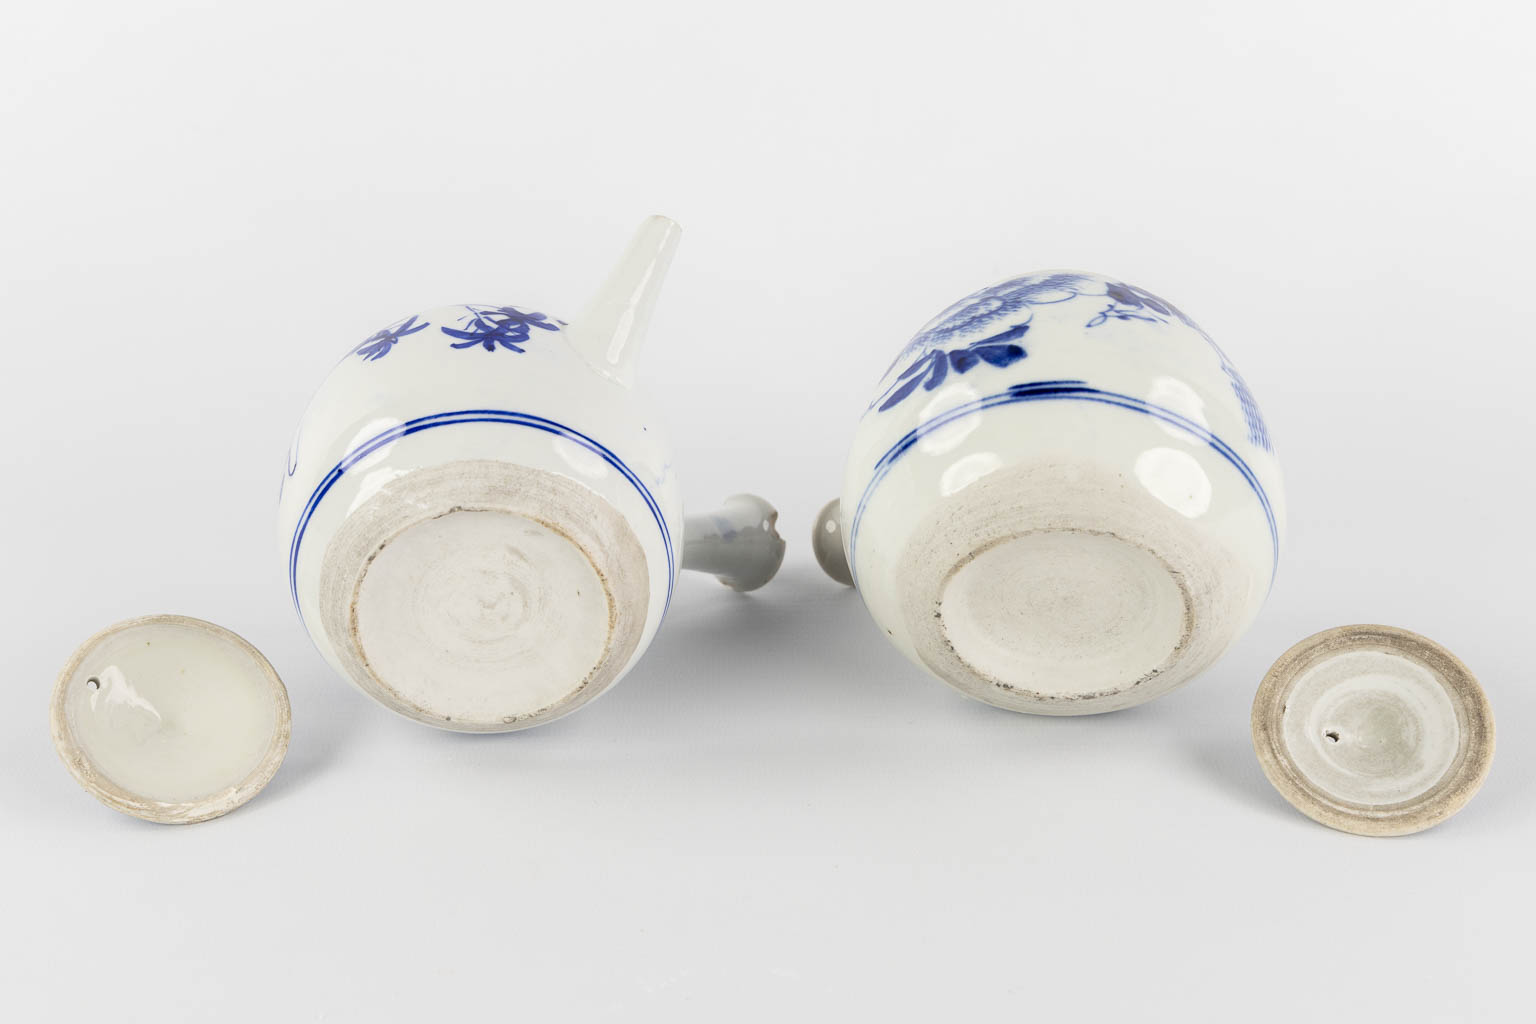 Three Chinese and Japanese teapots, blue-white decor. (W:20 x H:14 cm)